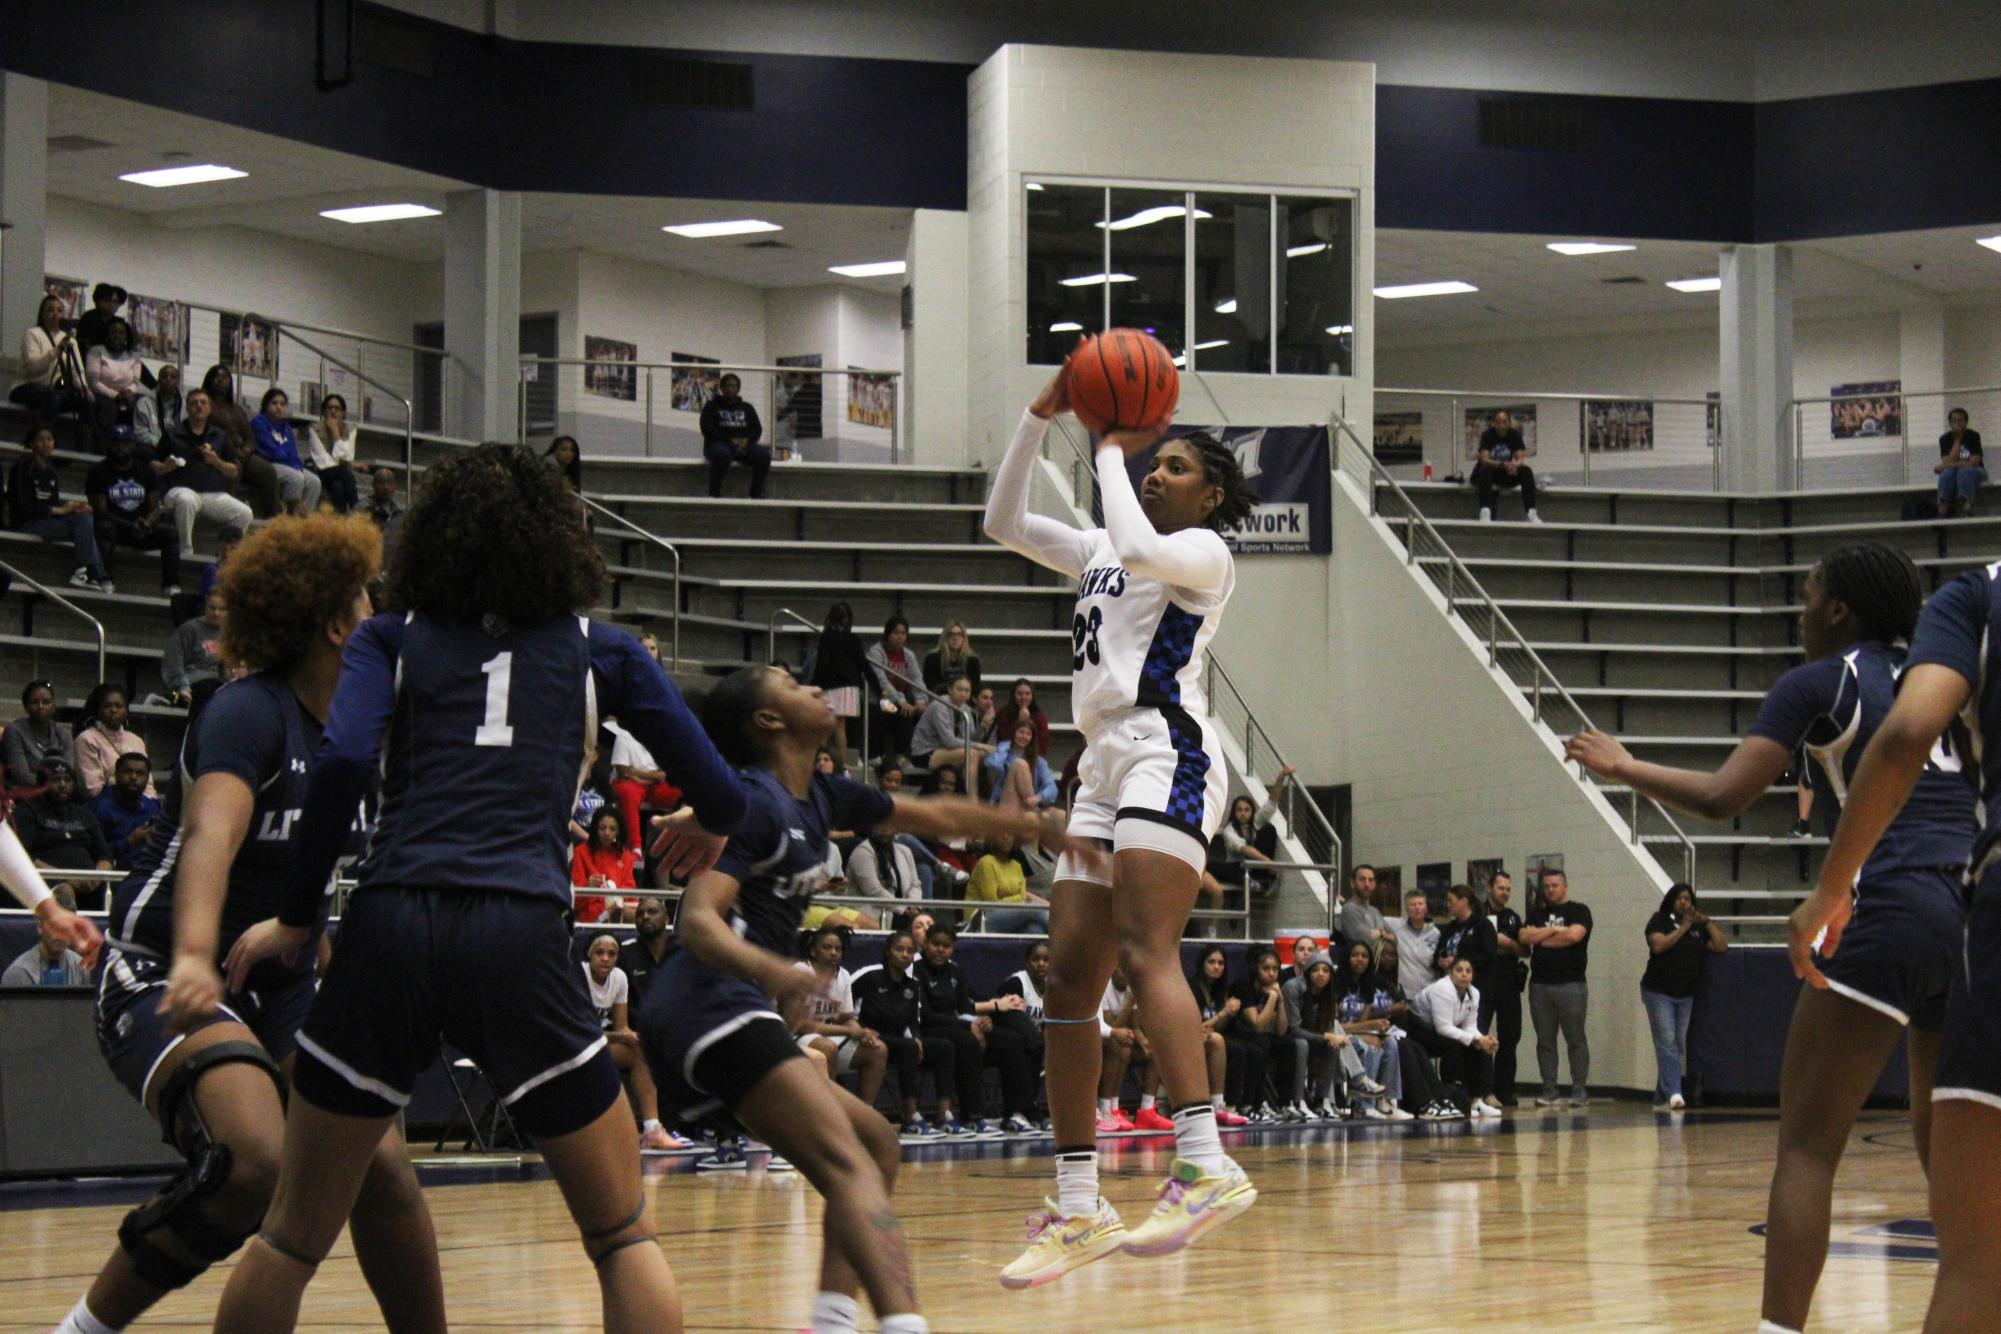 Lady Hawks Gear Up for Regional Semi-Finals Showdown Against Boswell at Wilkerson-Greines Center